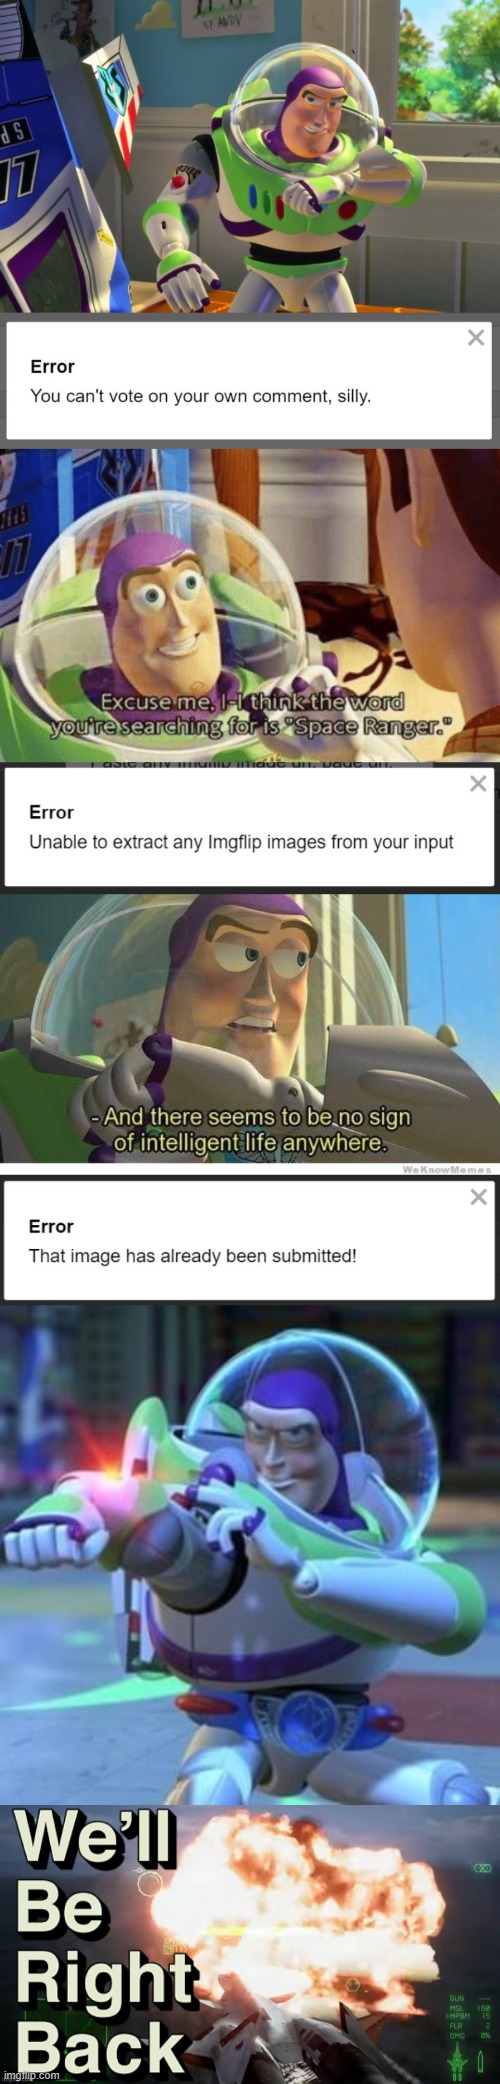 Buzz lightyear has a conversation with imgflip | image tagged in funny,funny memes,buzz lightyear | made w/ Imgflip meme maker